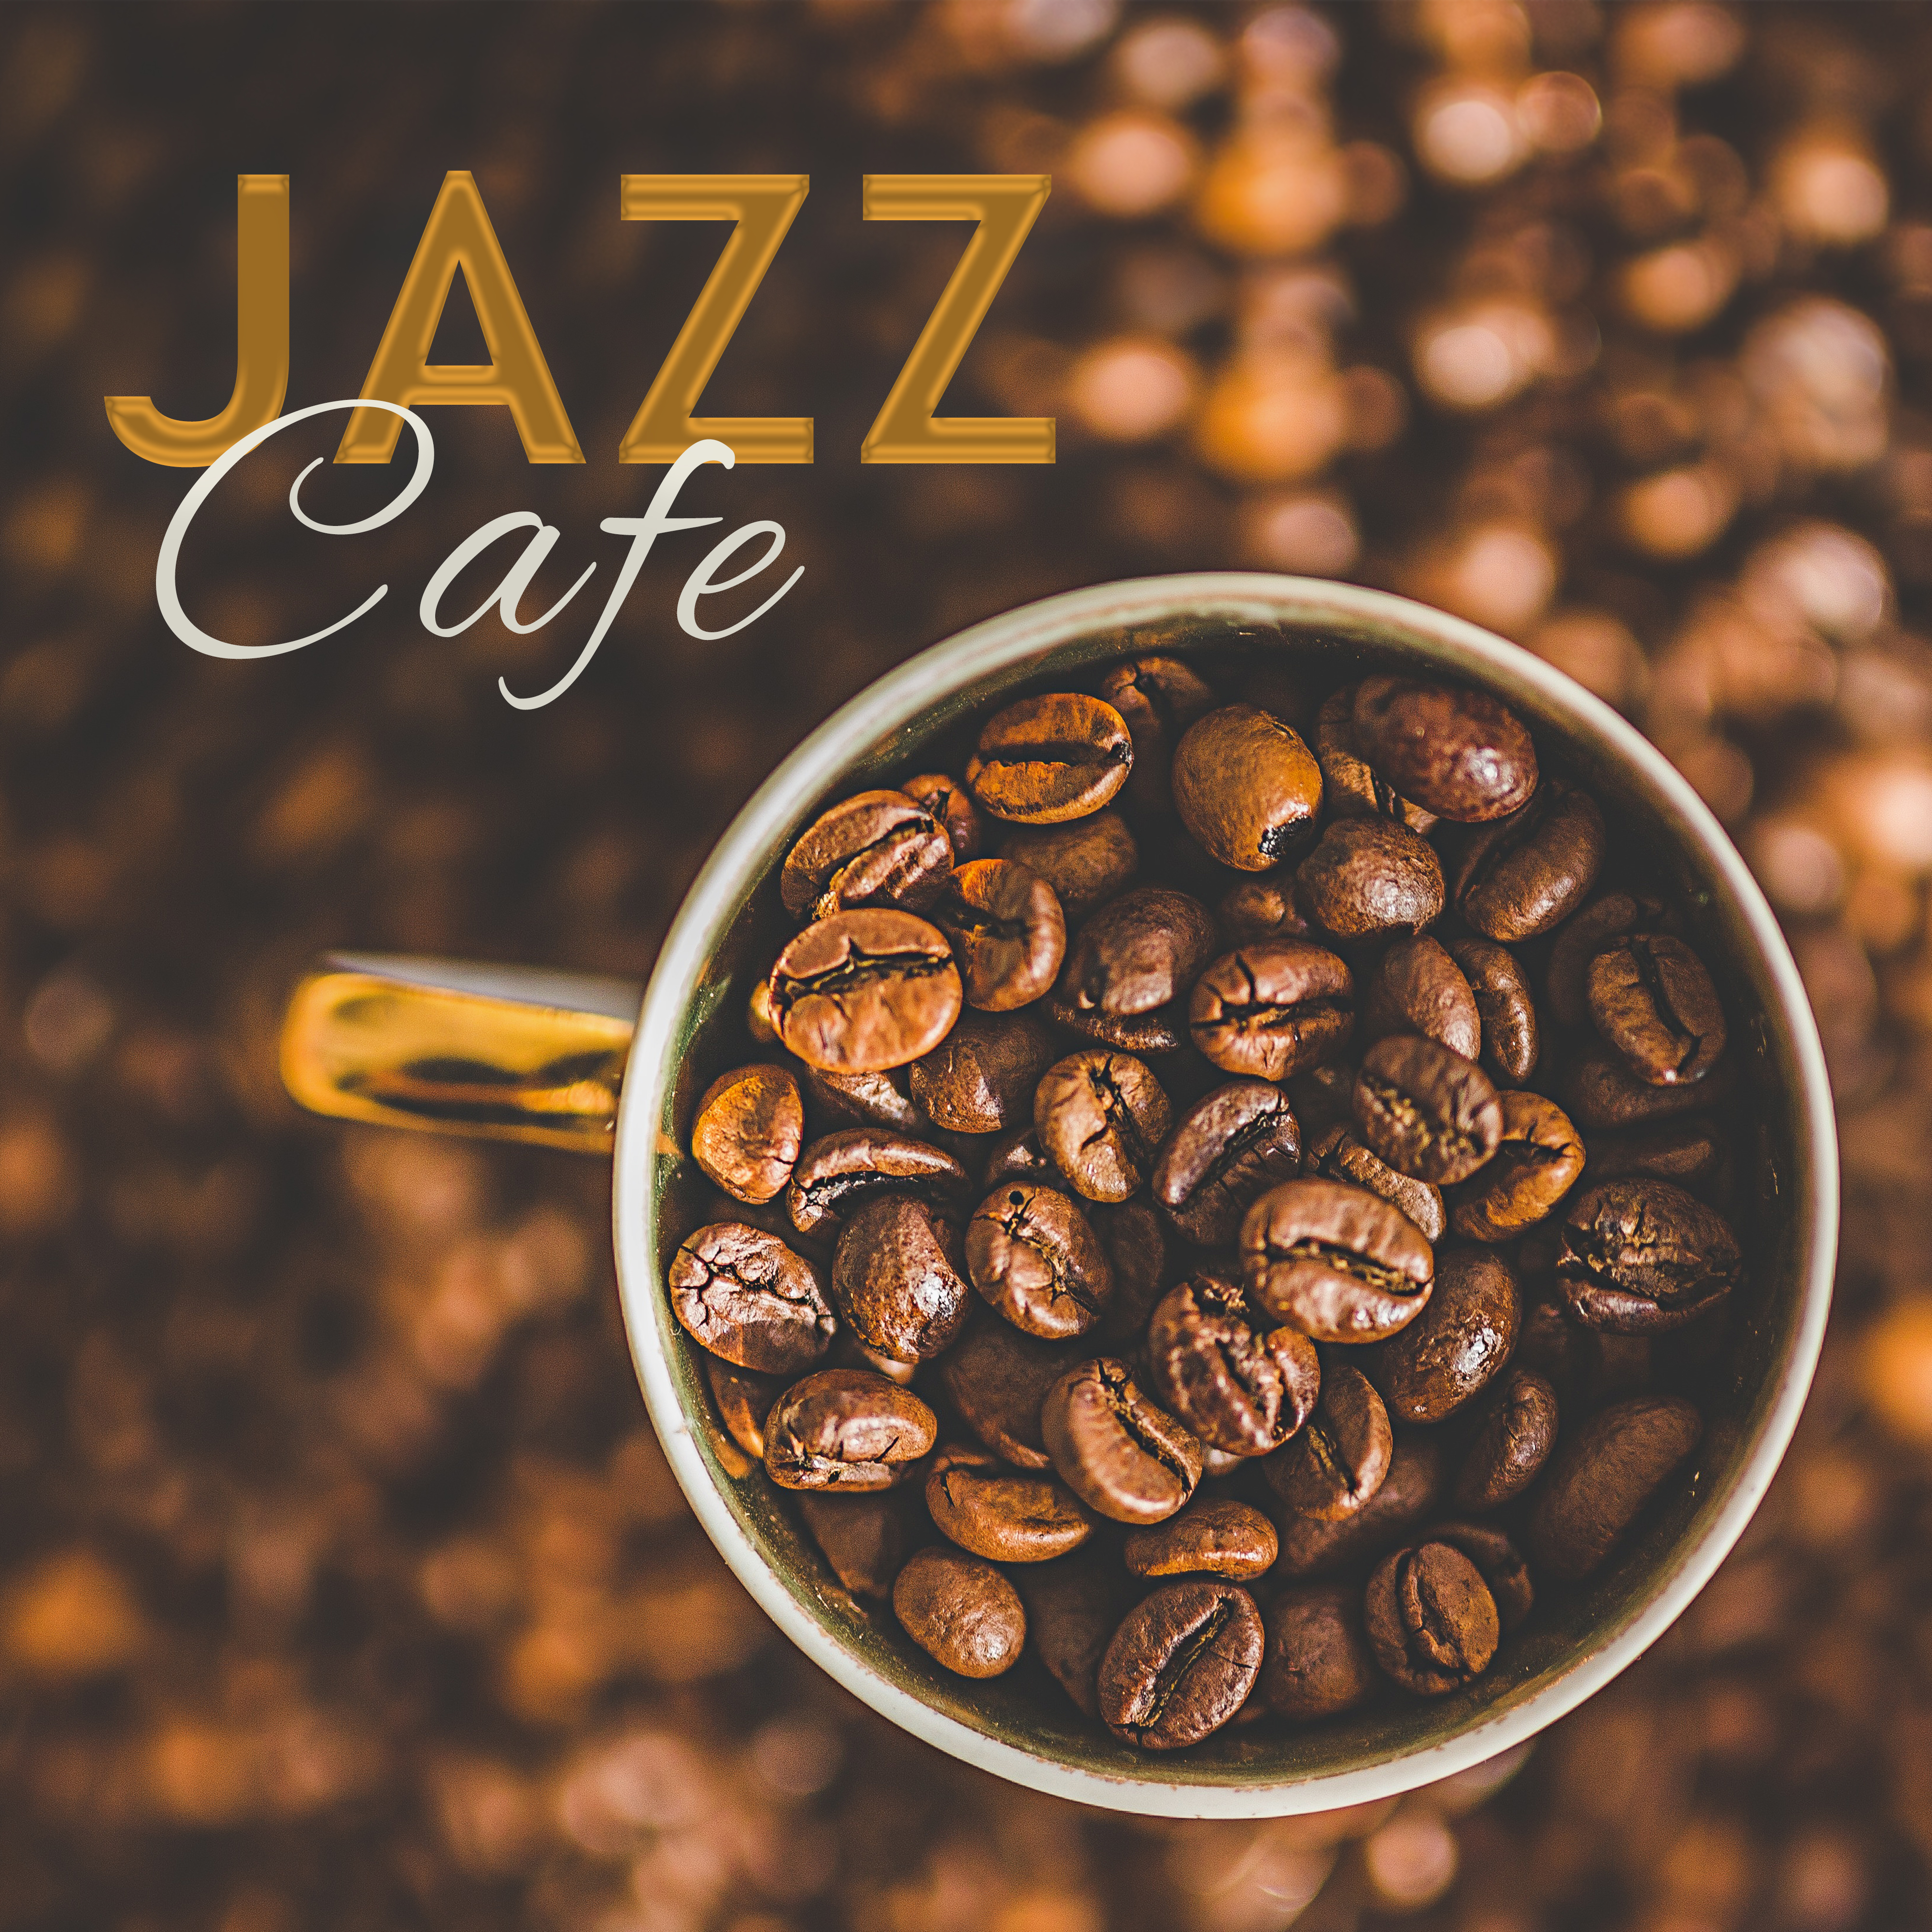 Jazz Cafe  Instrumental Music for Cafe  Bar, Jazz for Restaurant, Easy Listening Music, Cocktail Dinner Background Music, Coffee on the Morning